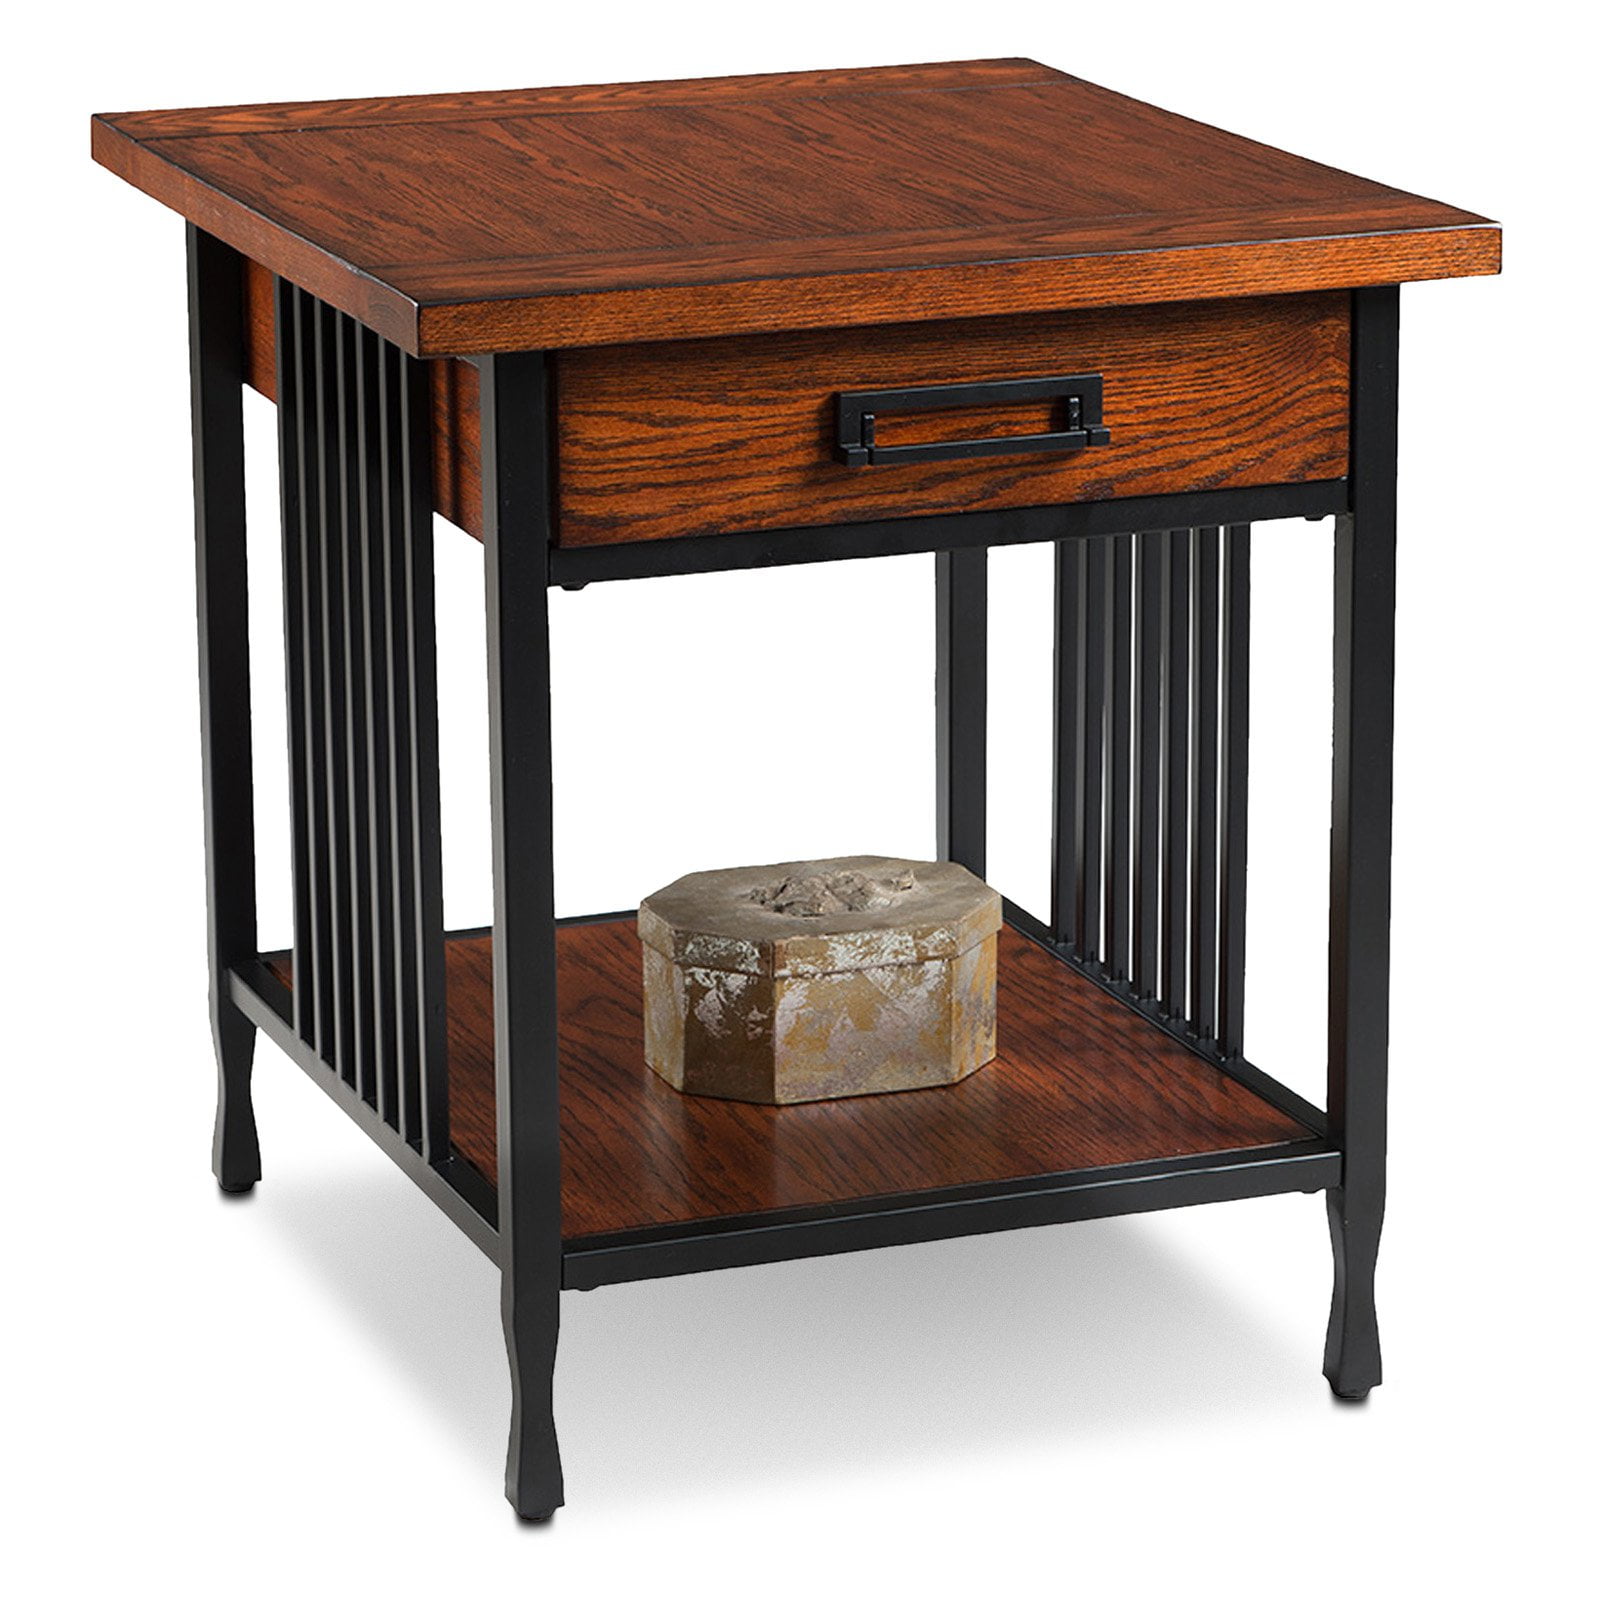 Modern Craftsman Distressed Oak End Table by Home Styles 